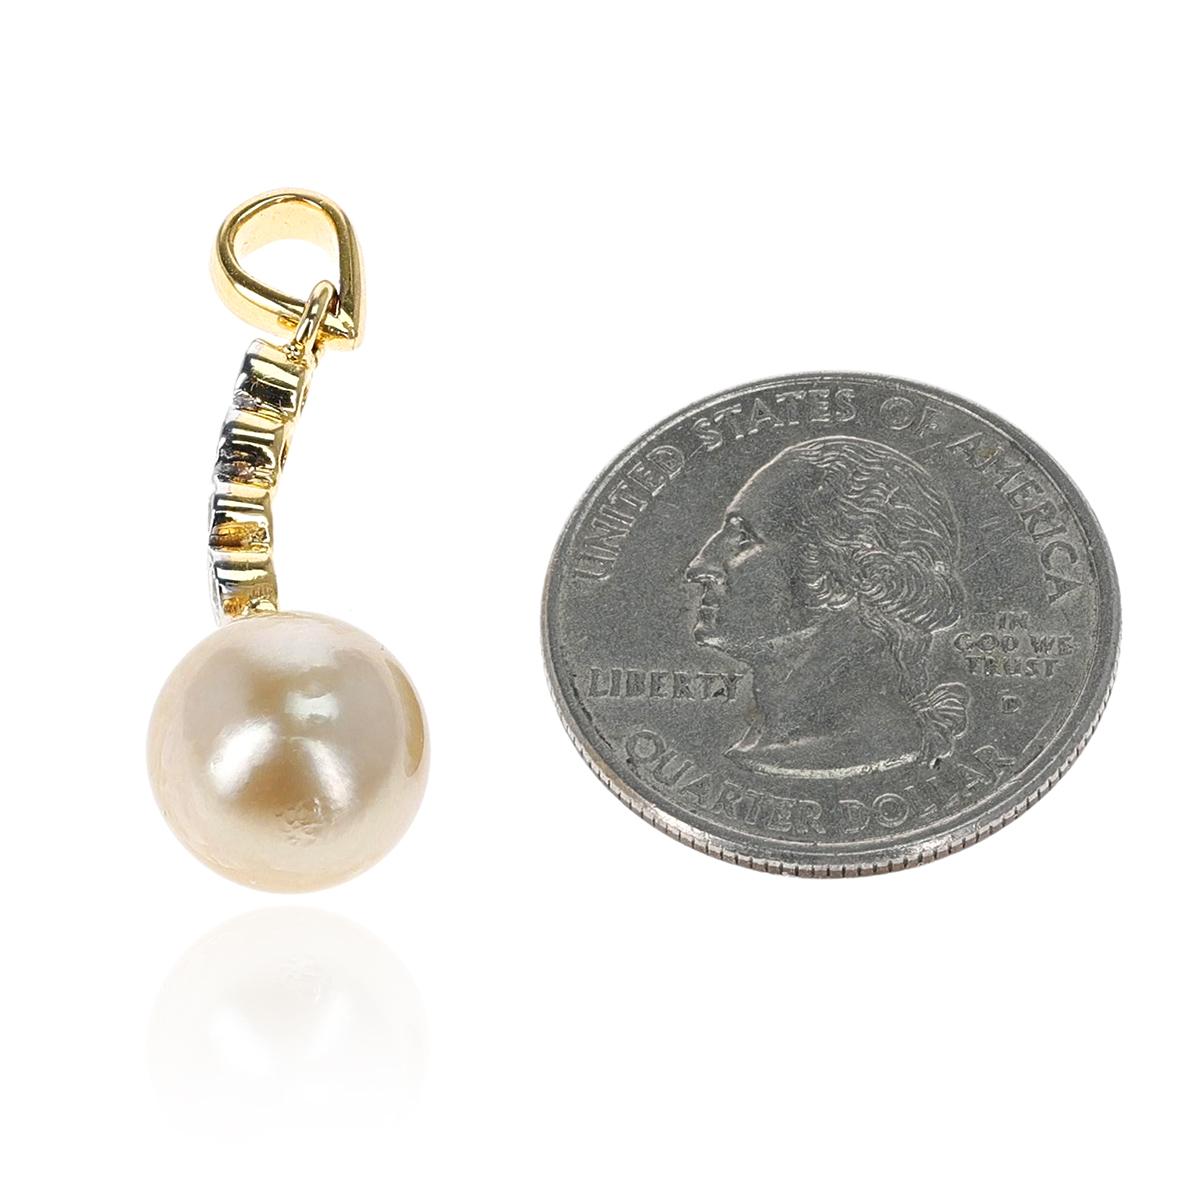 A South Sea Pearl and Diamond Pendant made in 14K Gold. The total weight of the pendant is 3.90 grams. The weight of the pearl is 10.40 carats and the total weight of the diamonds is 0.25 carats. Chain not included. Chain of choice can be added on